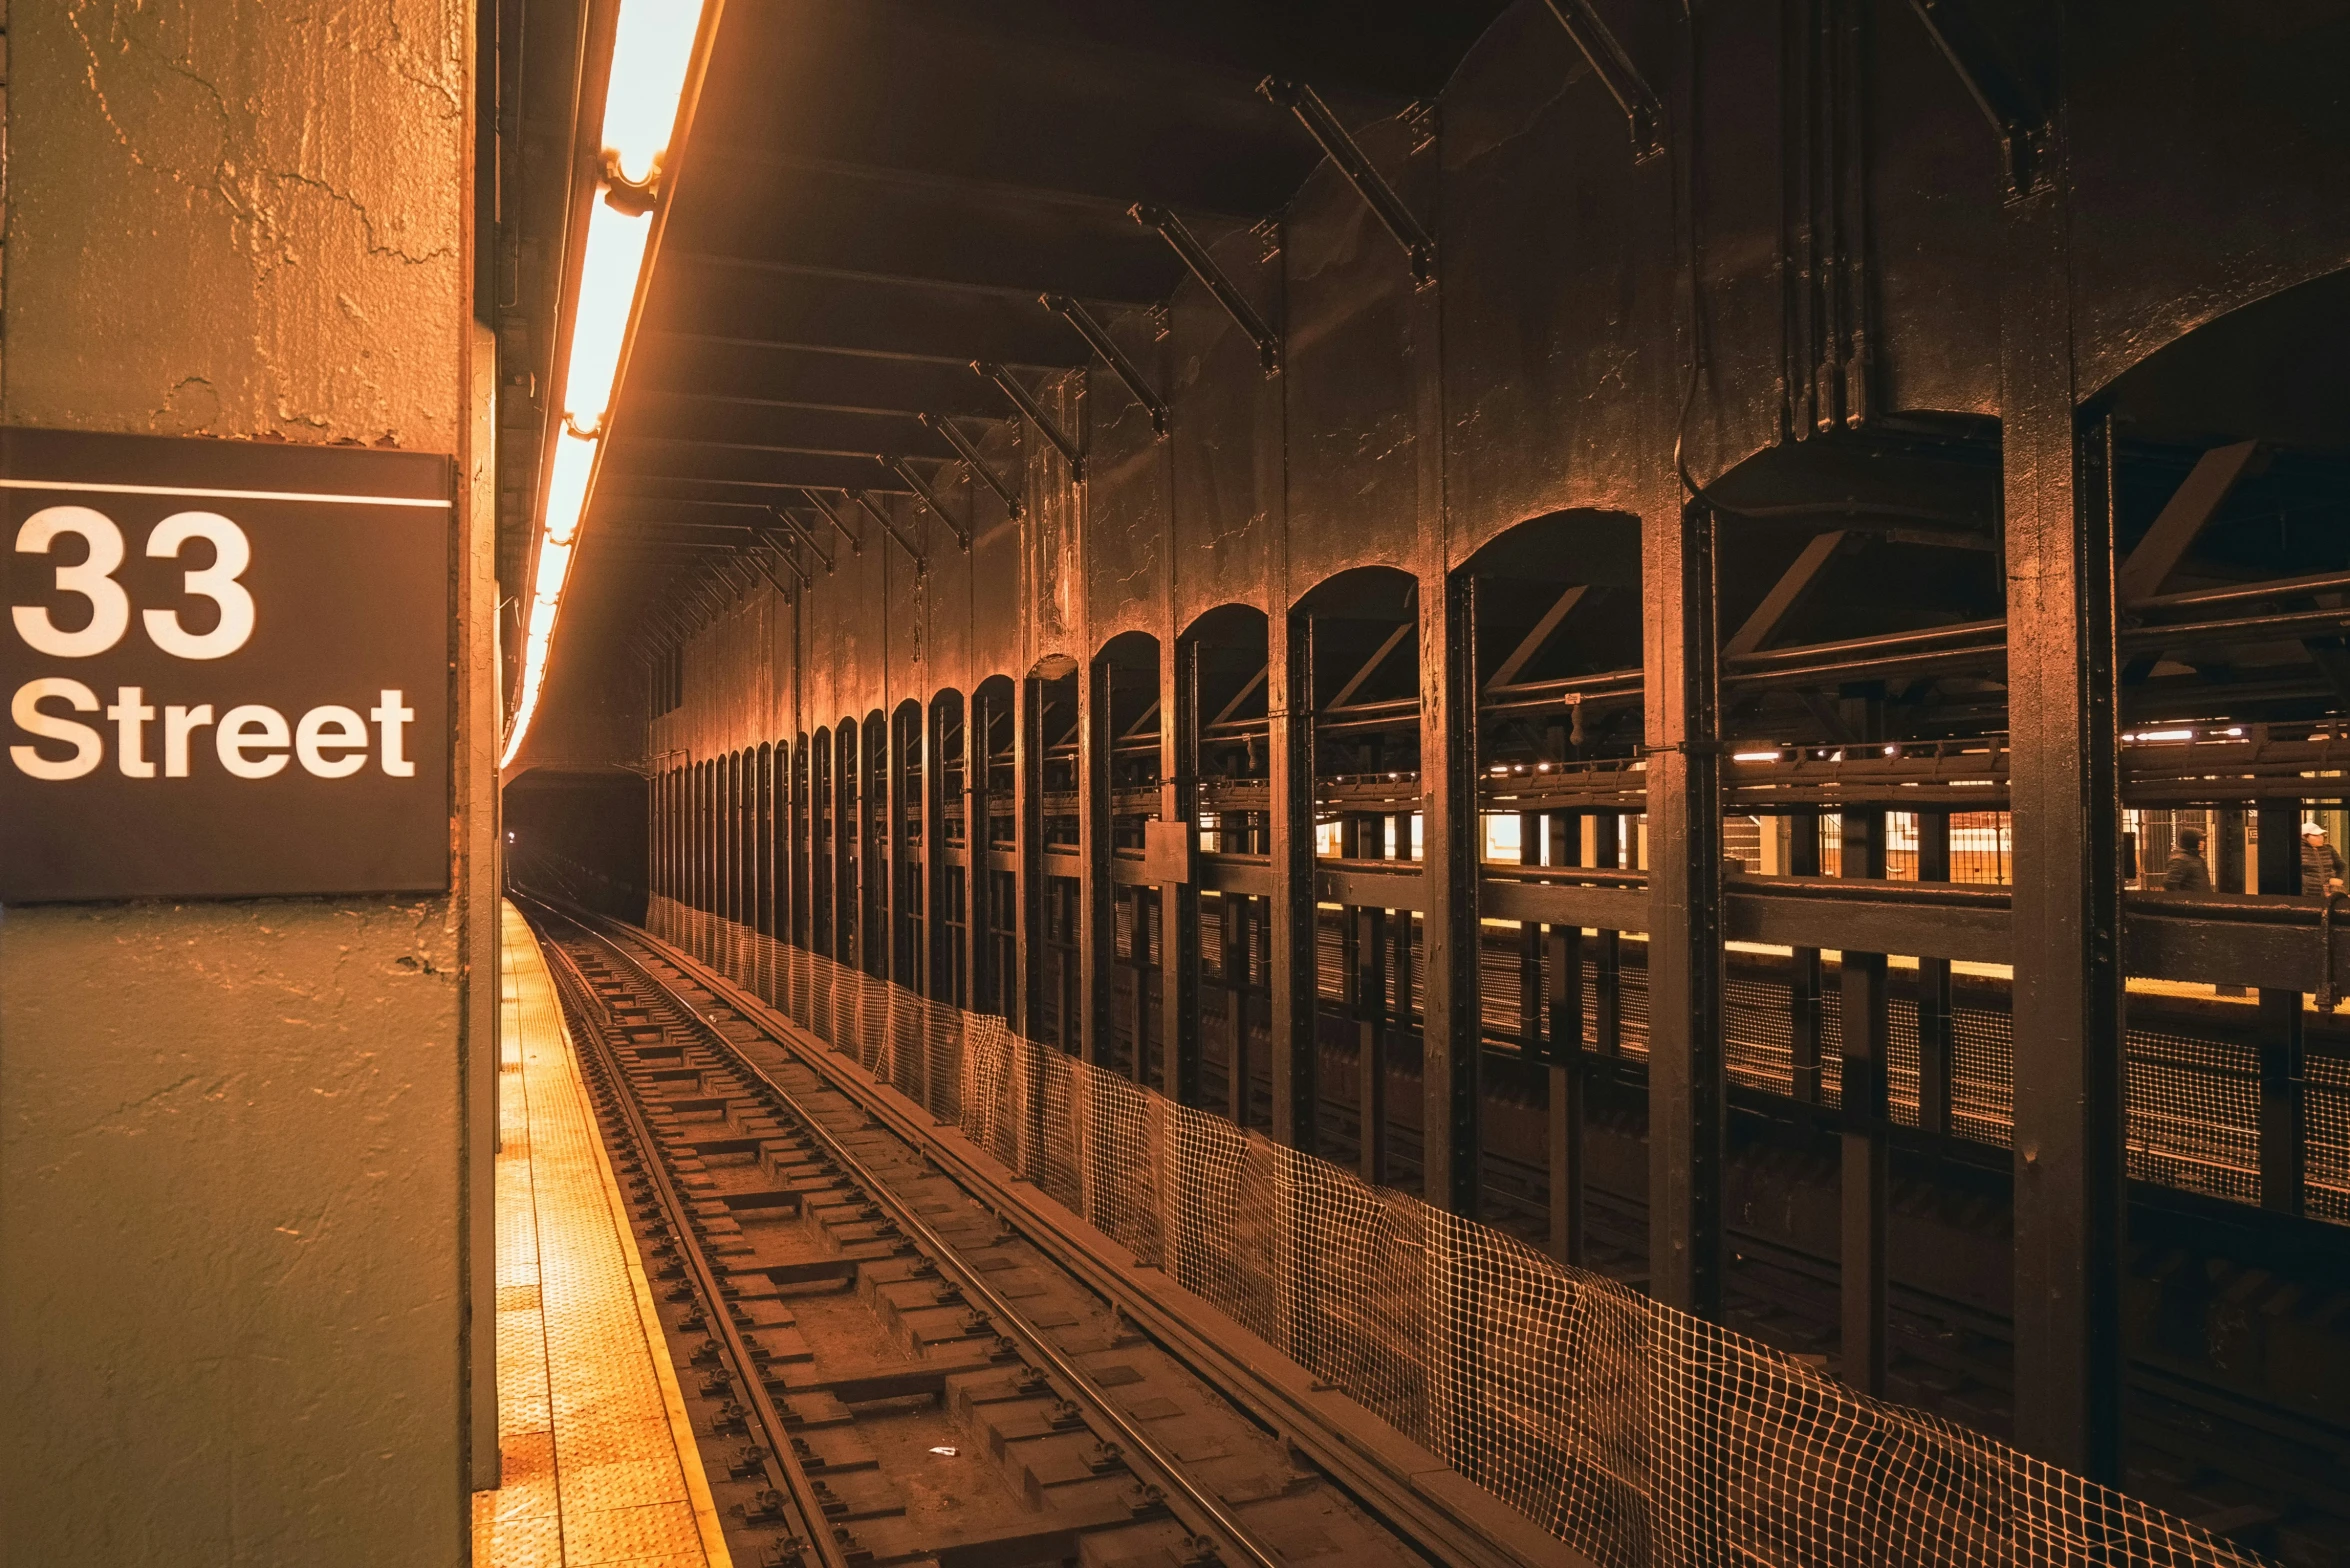 a train on the tracks in a subway